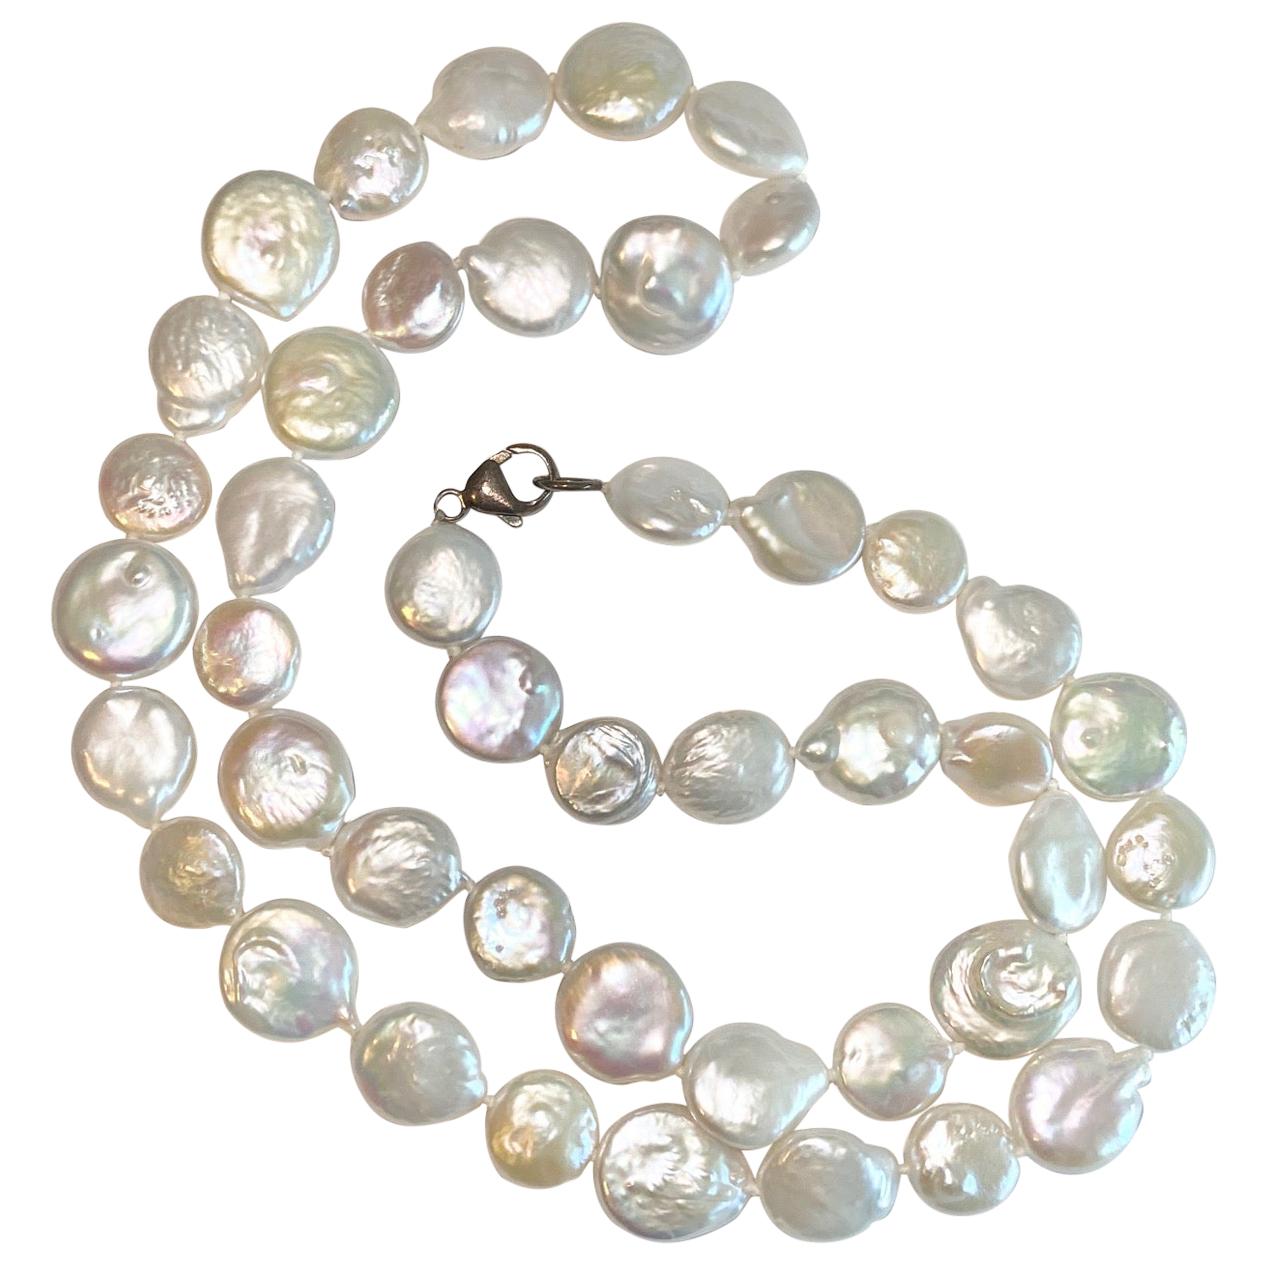 Genuine Freshwater Button and Coin Pearl Necklace Strand, Undyed and Ex Luster